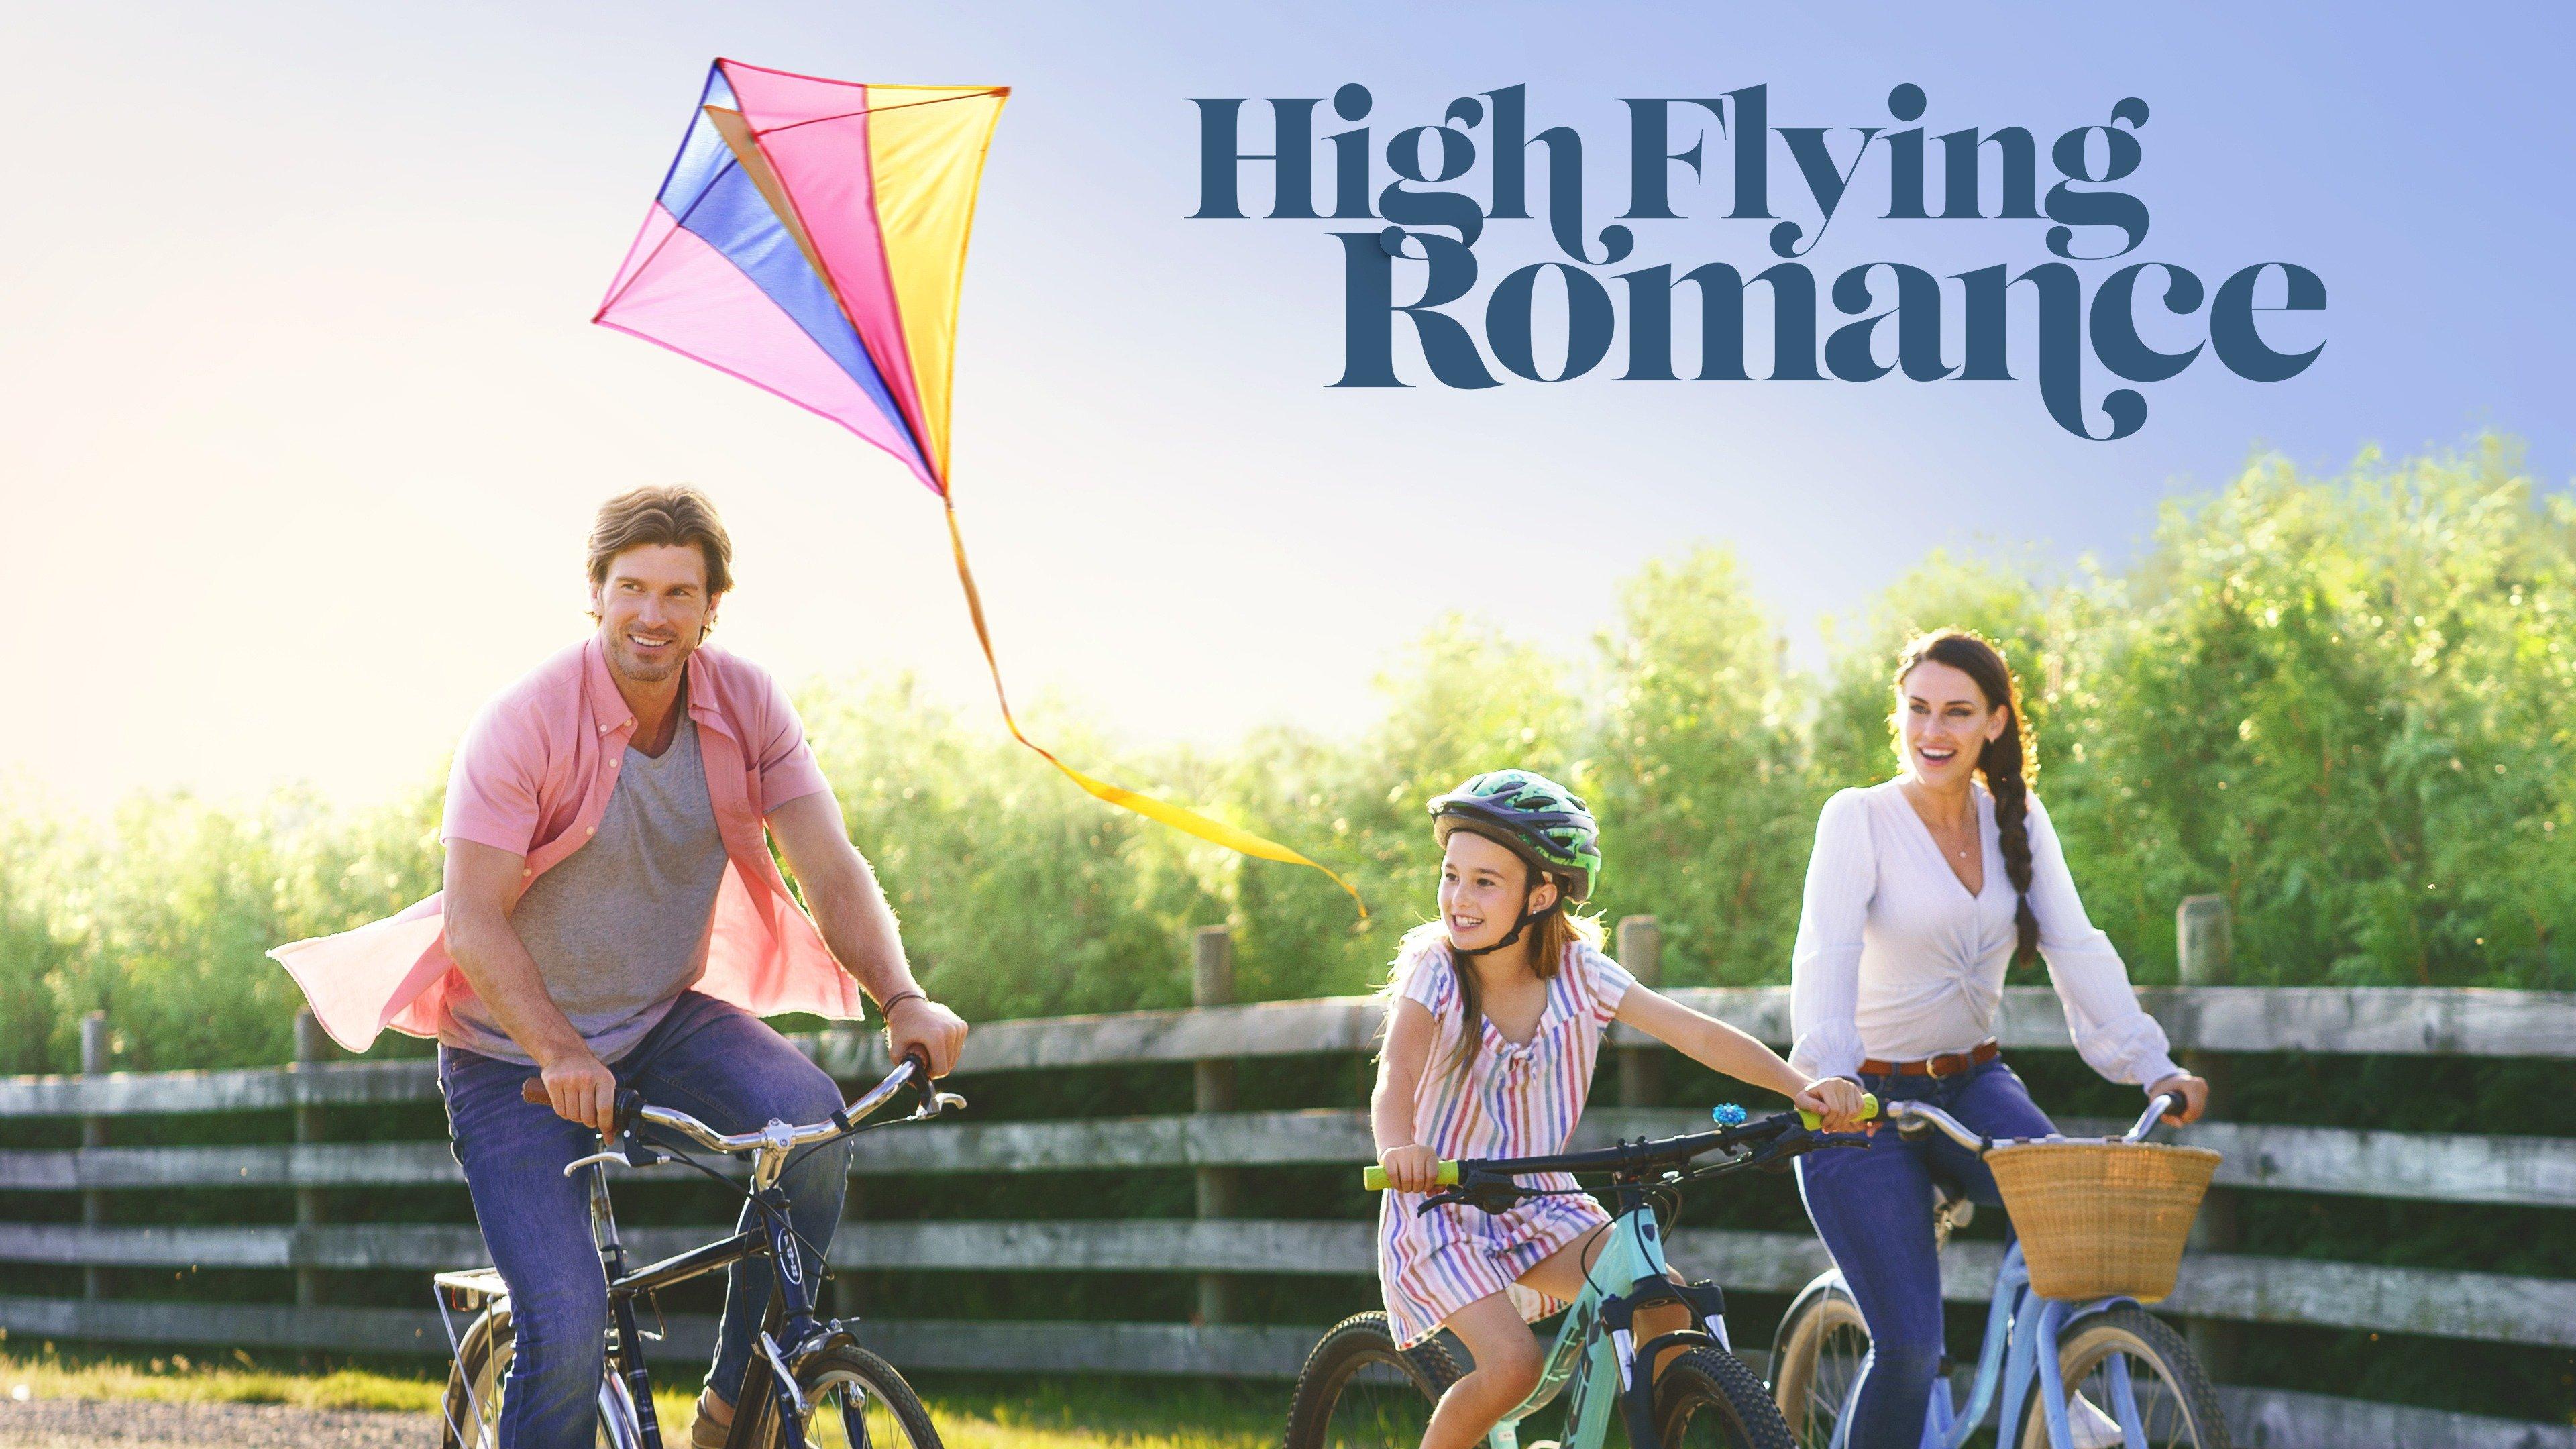 Watch High Flying Romance Streaming Online on Philo (Free Trial)